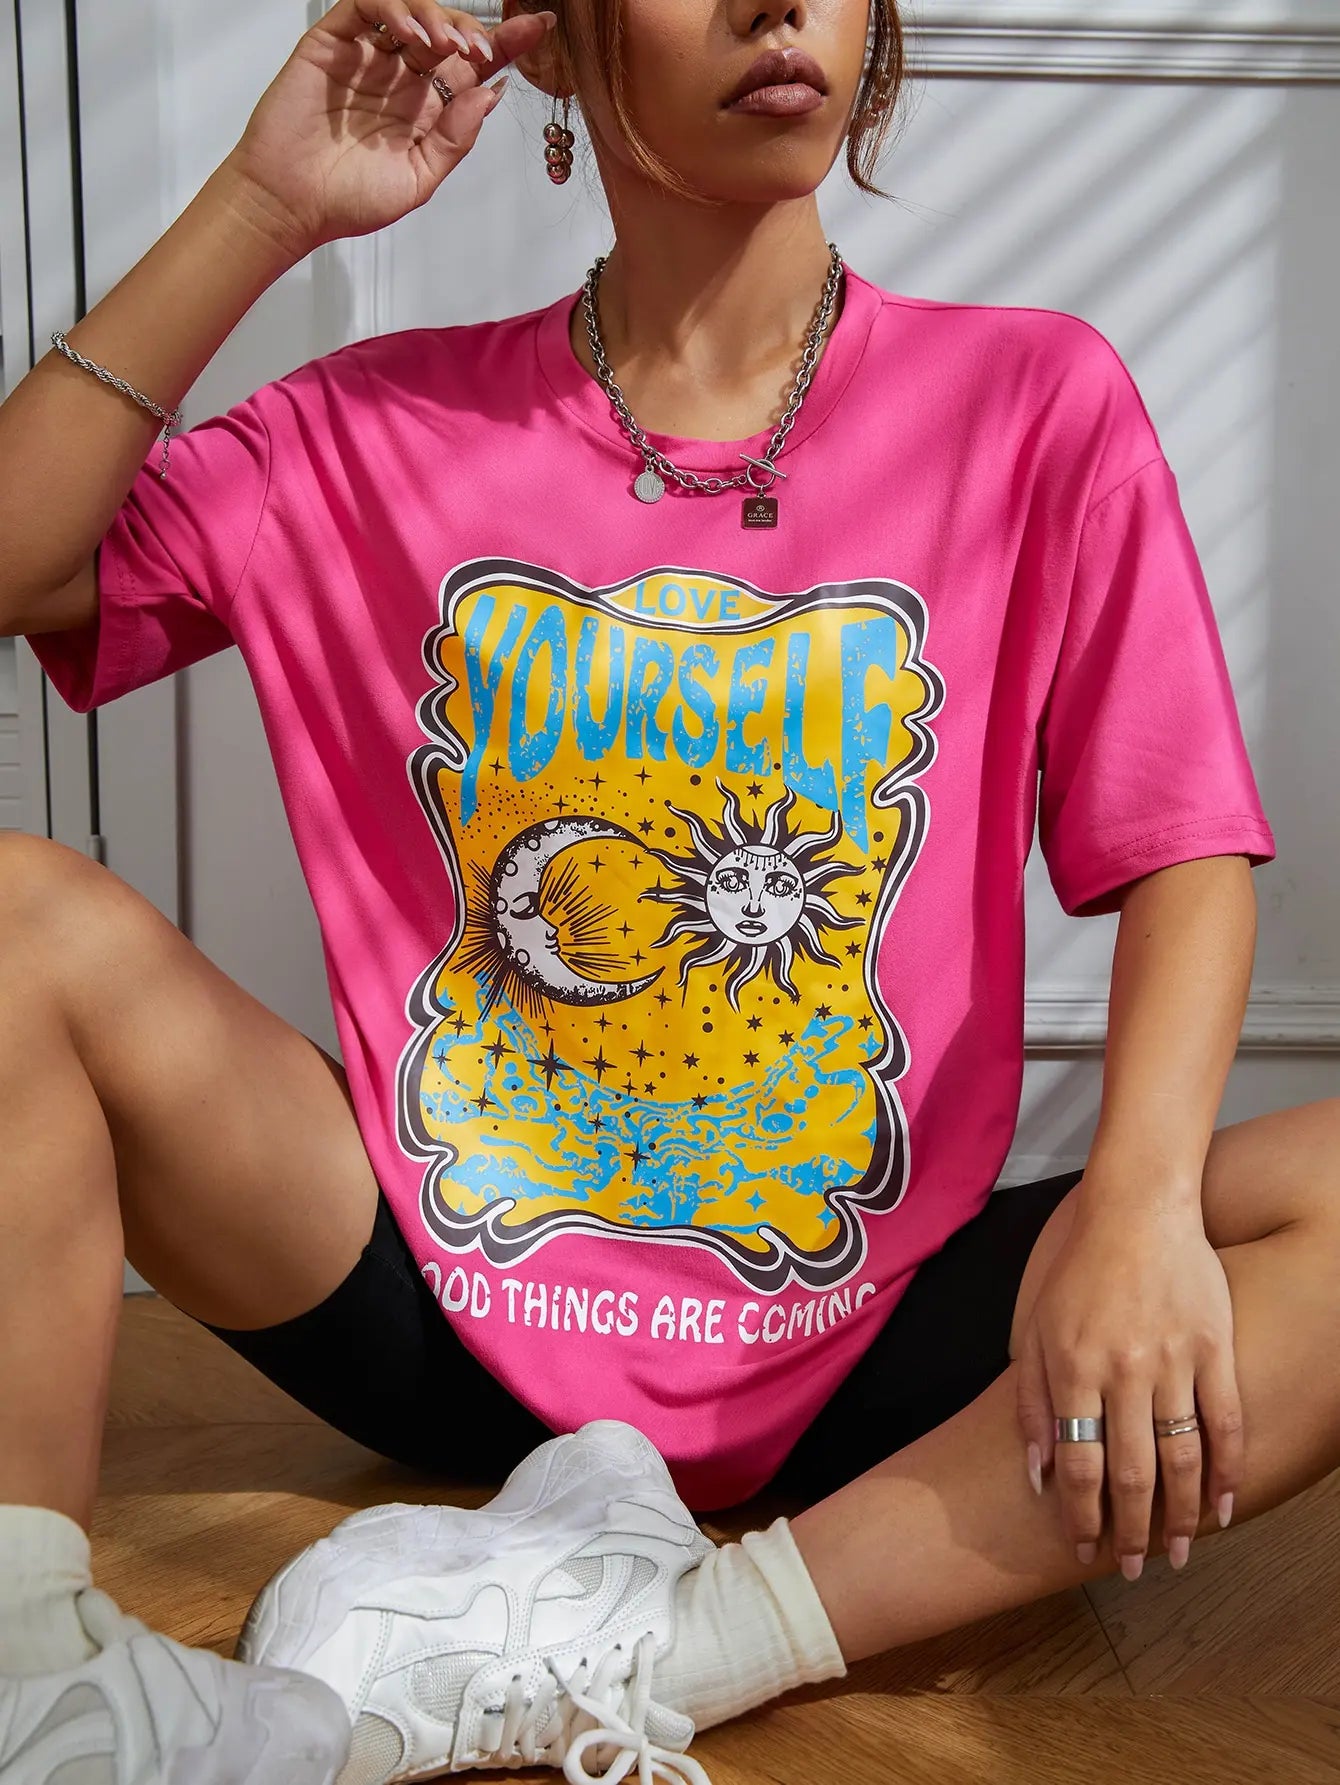 Love Yourself, Good Things Are Coming Shirt